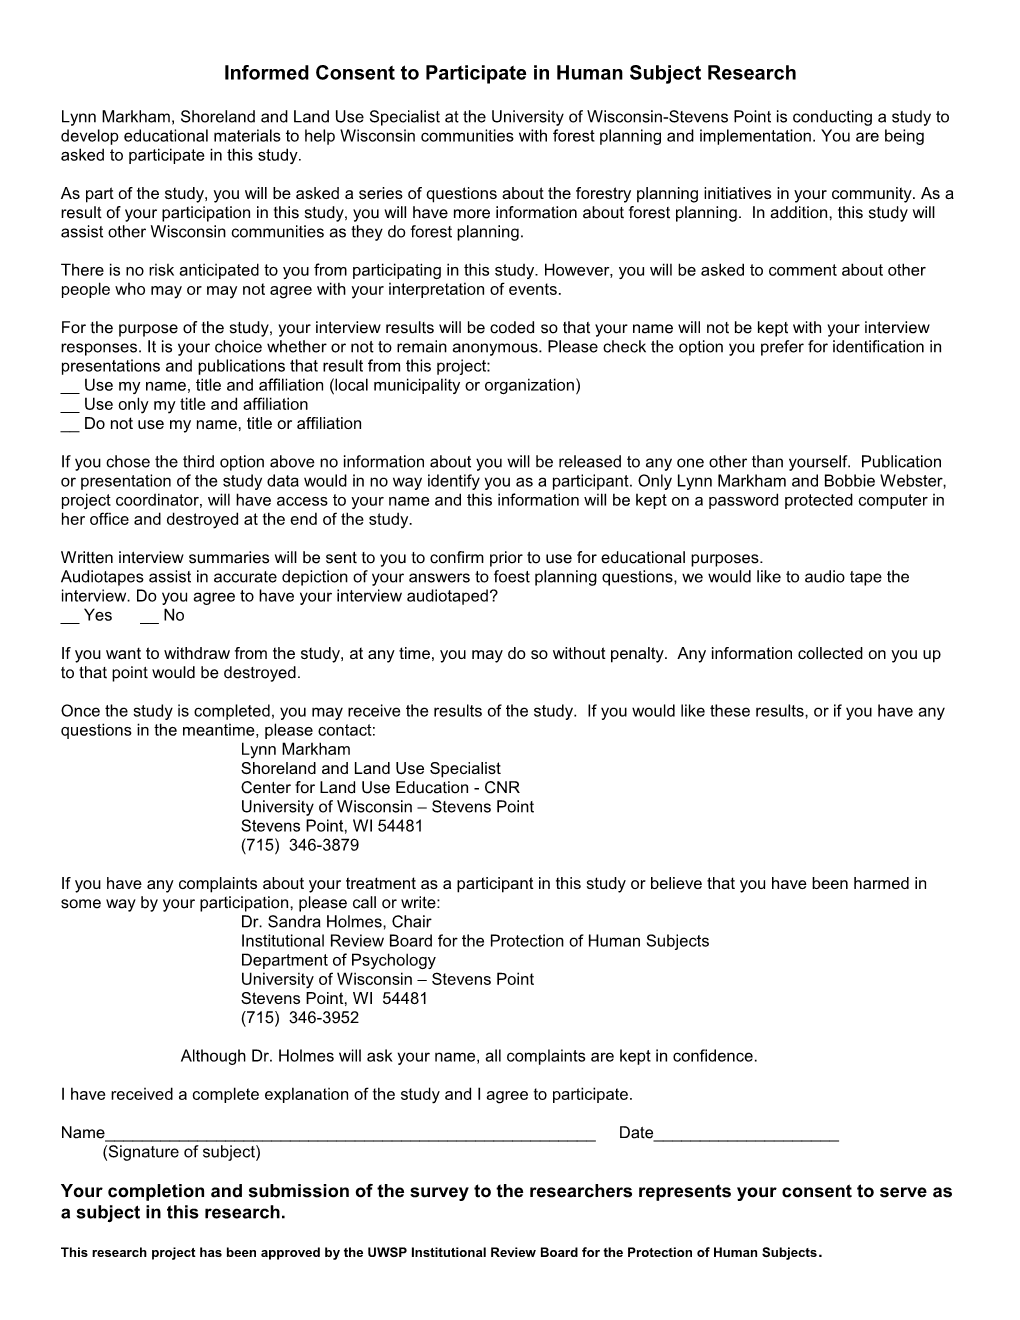 Instructions for INFORMED CONSENT FORM